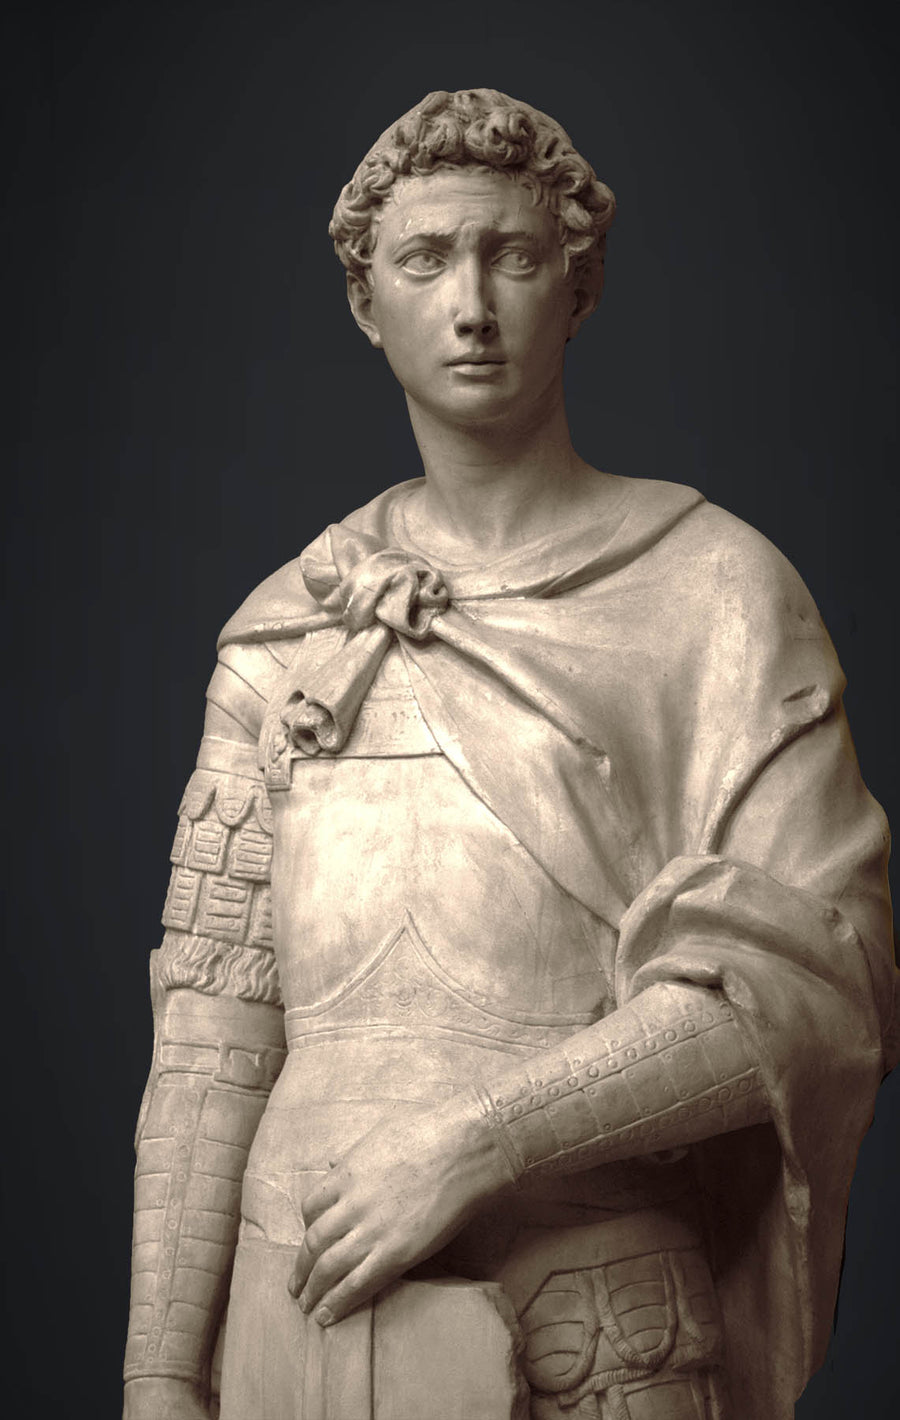 photo detail of plaster cast sculpture of male figure, namely Saint George, standing in armor and resting shield in front, on dark gray background